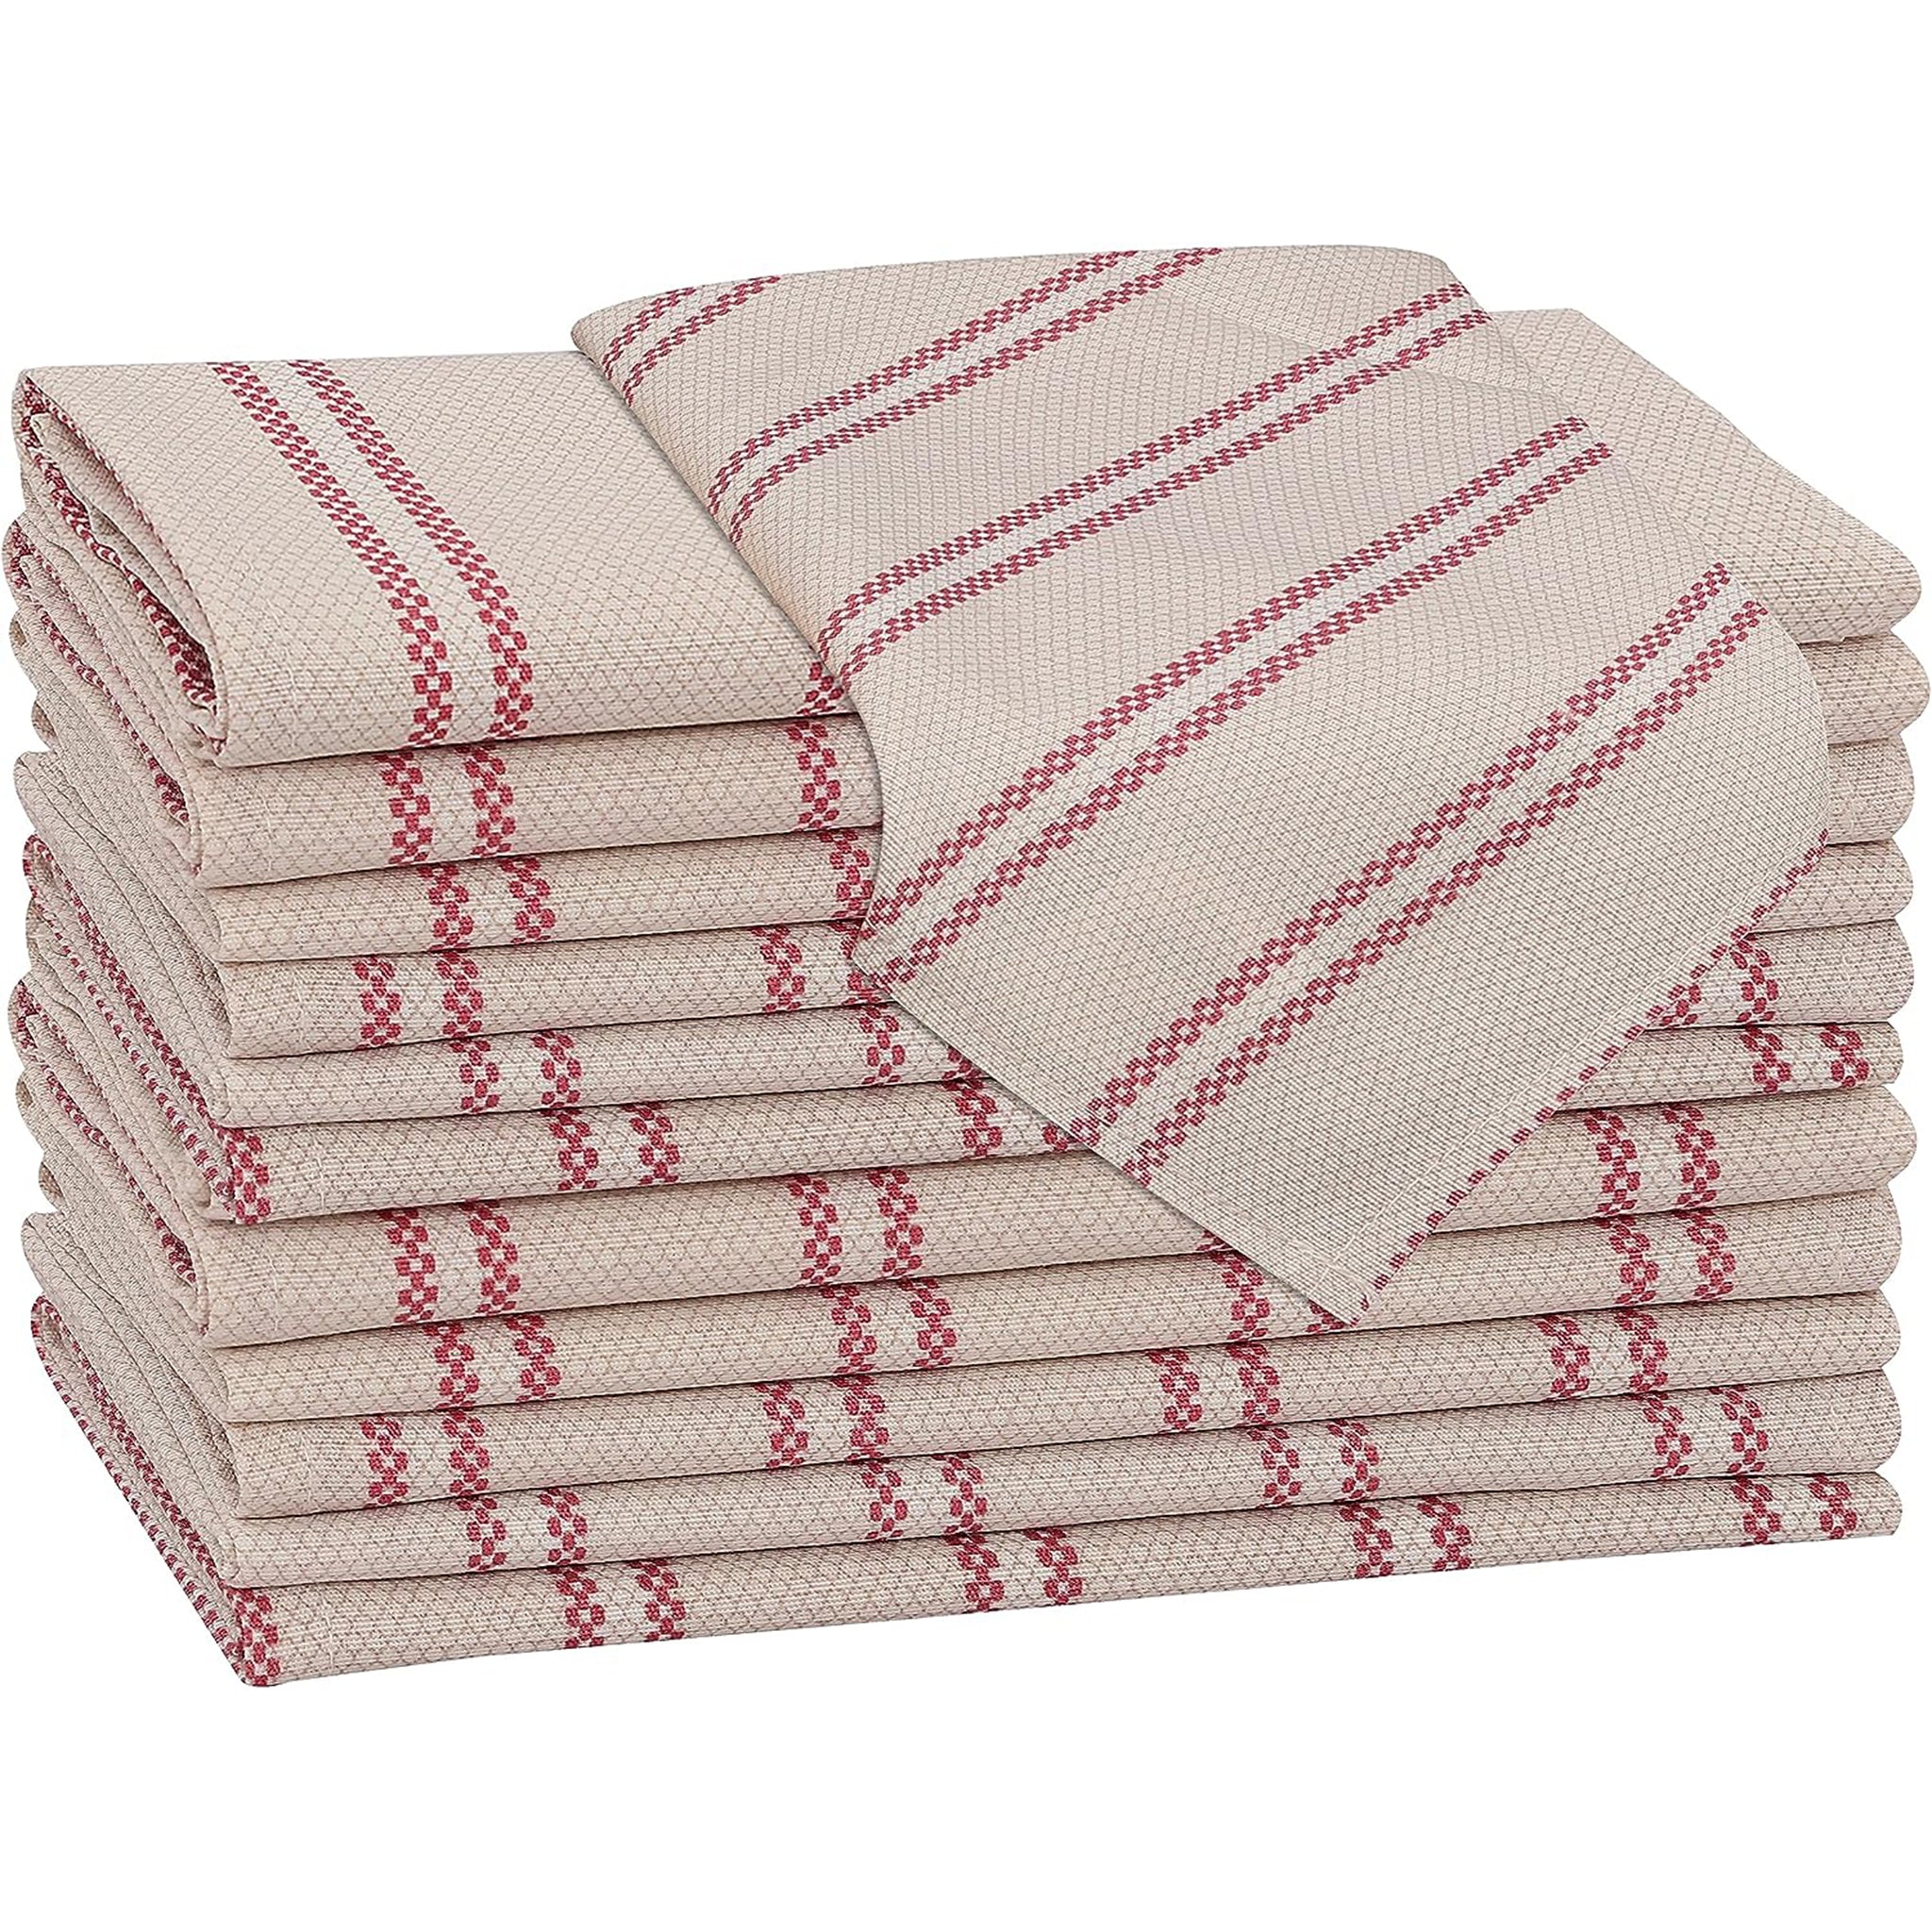 Ruvanti Cloth Napkins Set of 12 Cotton 100%, 18x18 inches Napkins Cloth  Washable, Soft, Absorbent. Cotton Napkins for Parties, Christmas,  Thanksgiving, Weddings, Dinner Napkins Cloth - Faded 